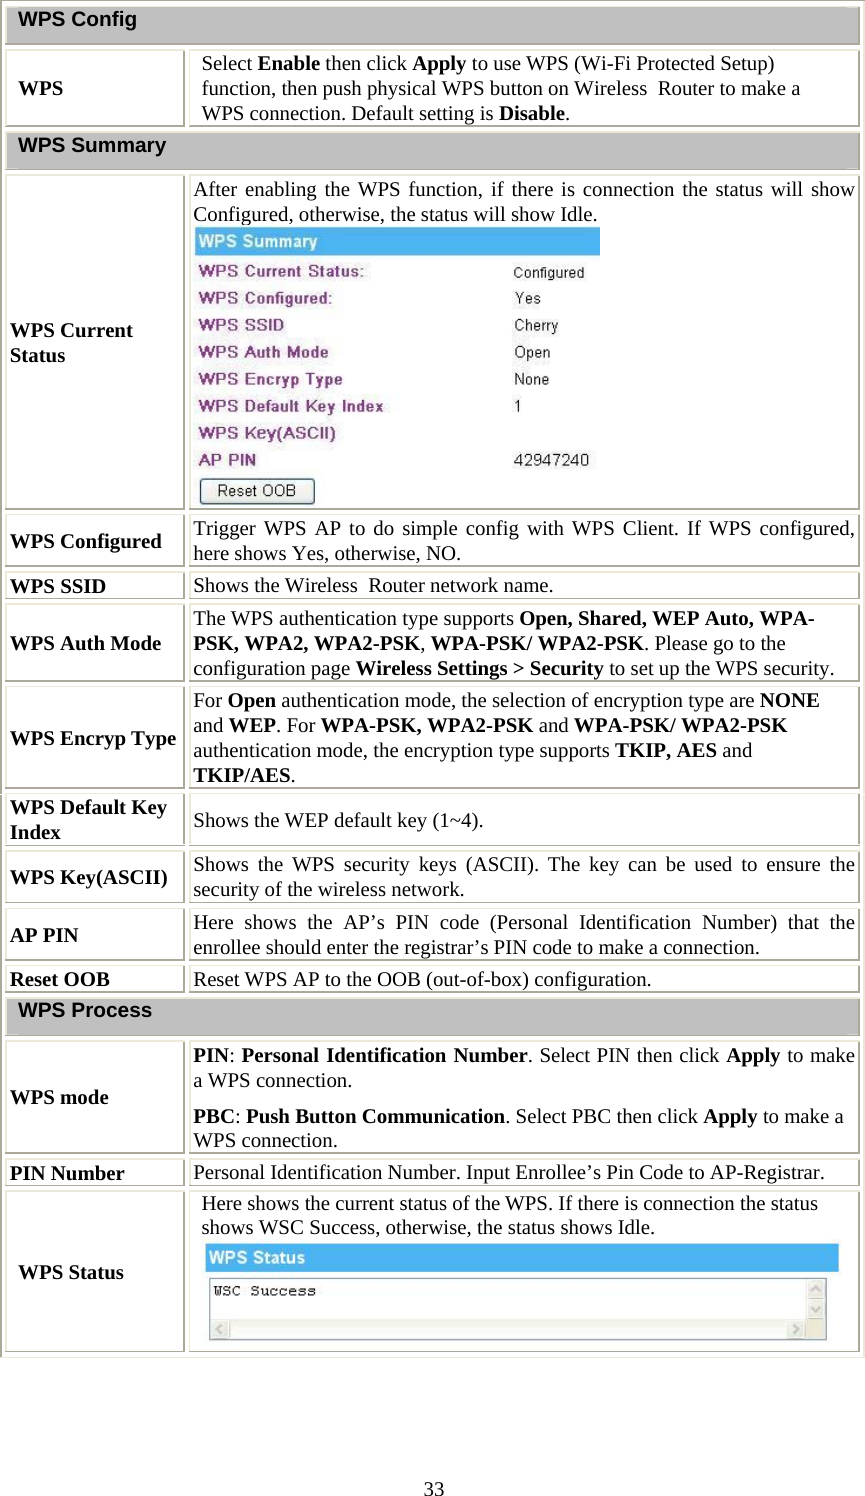   33WPS Config WPS  Select Enable then click Apply to use WPS (Wi-Fi Protected Setup) function, then push physical WPS button on Wireless  Router to make a WPS connection. Default setting is Disable. WPS Summary WPS Current Status After enabling the WPS function, if there is connection the status will show Configured, otherwise, the status will show Idle.  WPS Configured  Trigger WPS AP to do simple config with WPS Client. If WPS configured, here shows Yes, otherwise, NO. WPS SSID  Shows the Wireless  Router network name. WPS Auth Mode  The WPS authentication type supports Open, Shared, WEP Auto, WPA-PSK, WPA2, WPA2-PSK, WPA-PSK/ WPA2-PSK. Please go to the configuration page Wireless Settings &gt; Security to set up the WPS security.  WPS Encryp Type For Open authentication mode, the selection of encryption type are NONE and WEP. For WPA-PSK, WPA2-PSK and WPA-PSK/ WPA2-PSK authentication mode, the encryption type supports TKIP, AES and TKIP/AES. WPS Default Key Index  Shows the WEP default key (1~4). WPS Key(ASCII)  Shows the WPS security keys (ASCII). The key can be used to ensure the security of the wireless network.  AP PIN  Here shows the AP’s PIN code (Personal Identification Number) that the enrollee should enter the registrar’s PIN code to make a connection. Reset OOB  Reset WPS AP to the OOB (out-of-box) configuration.  WPS Process WPS mode PIN: Personal Identification Number. Select PIN then click Apply to make a WPS connection. PBC: Push Button Communication. Select PBC then click Apply to make a WPS connection. PIN Number  Personal Identification Number. Input Enrollee’s Pin Code to AP-Registrar. WPS Status Here shows the current status of the WPS. If there is connection the status shows WSC Success, otherwise, the status shows Idle.   